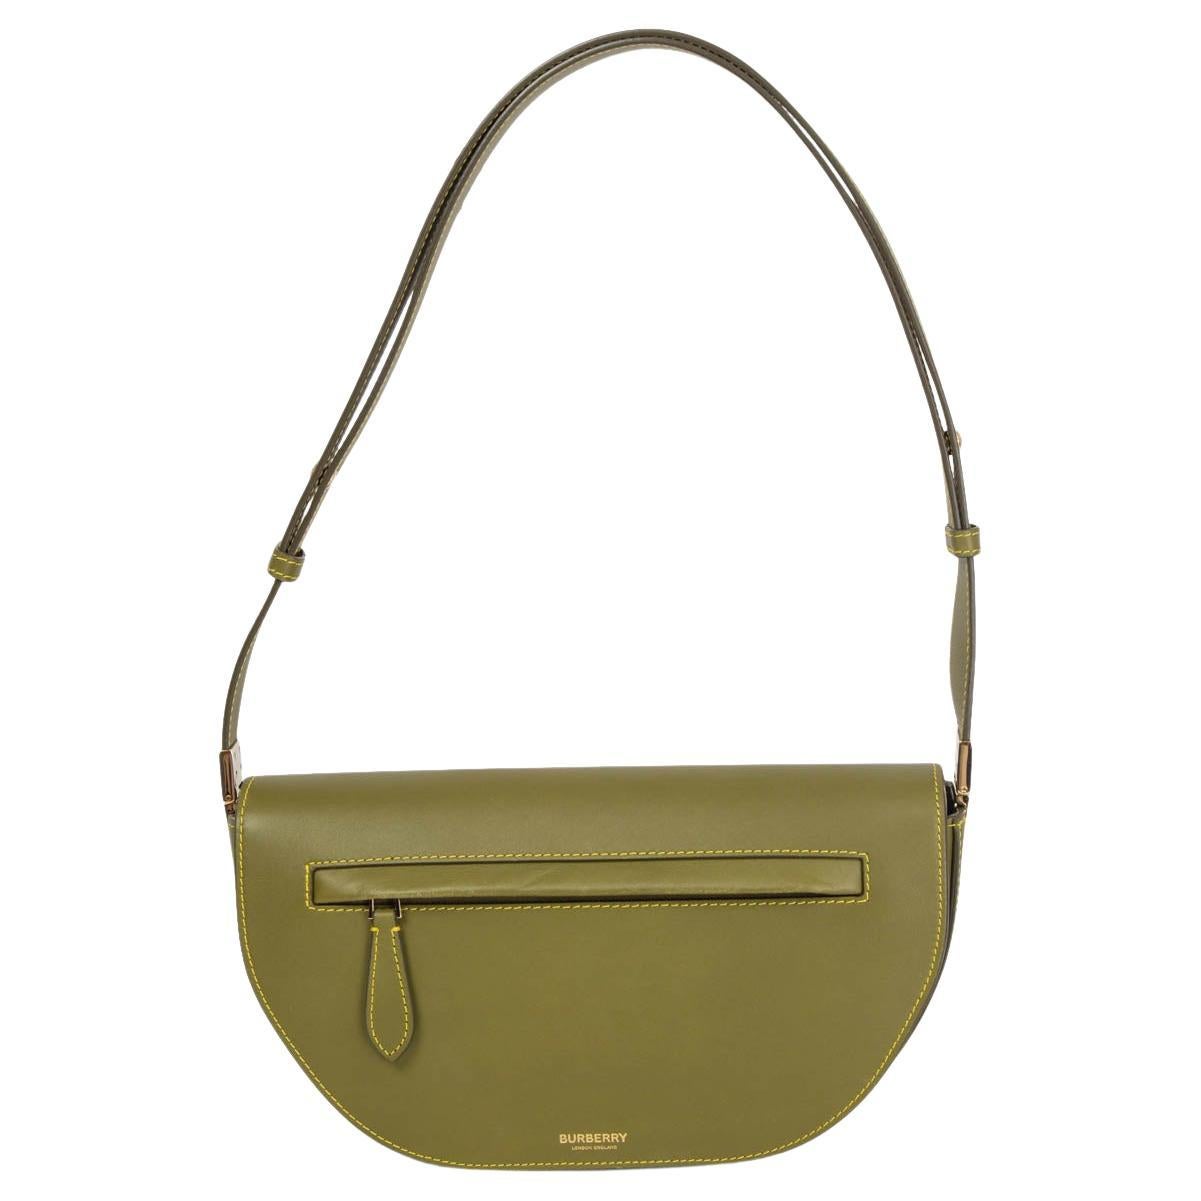 BURBERRY olive green leather OLYMPIA SMALL Shoulder Bag